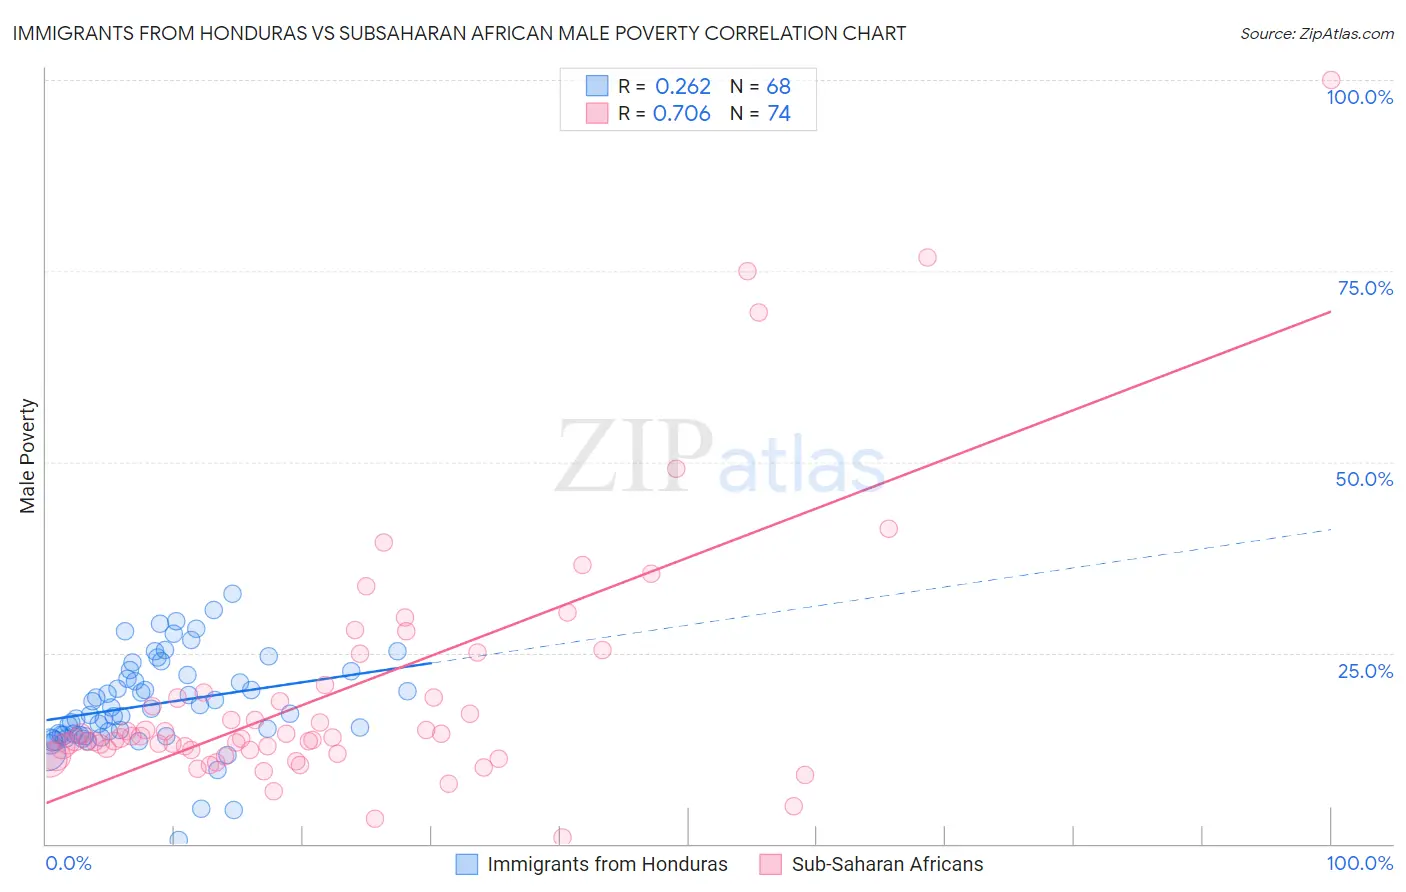 Immigrants from Honduras vs Subsaharan African Male Poverty